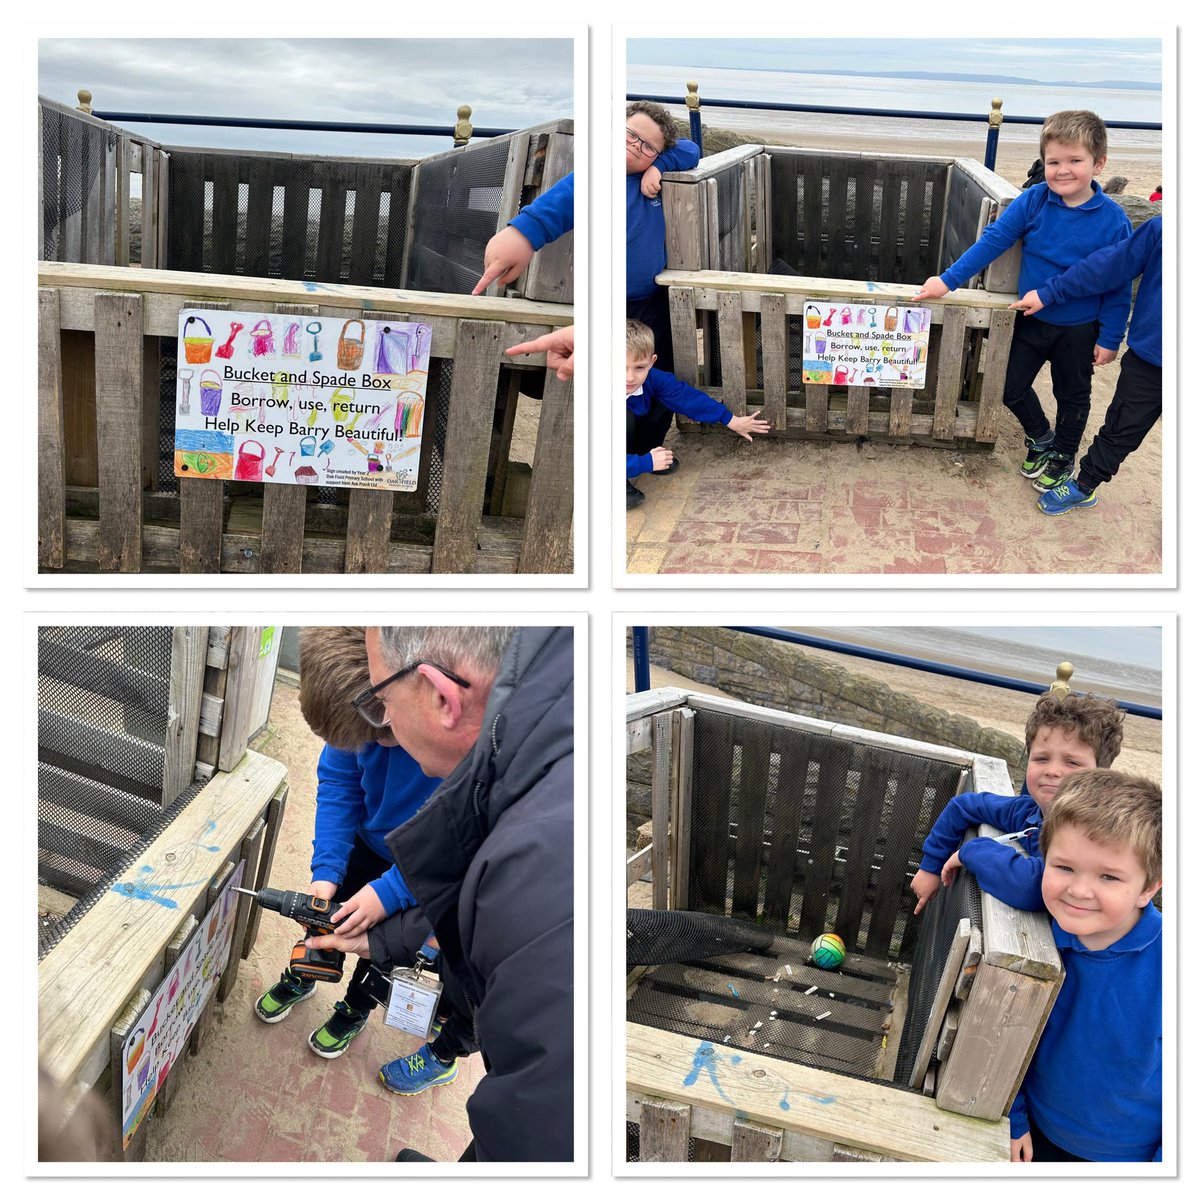 It’s finally up! Dosbarth Beech were so proud to put up the sign for the bucket and spade box today which they planned and designed - Borrow, use, return - let’s keep Barry beautiful! @Keep_Wales_Tidy @VOGCouncil